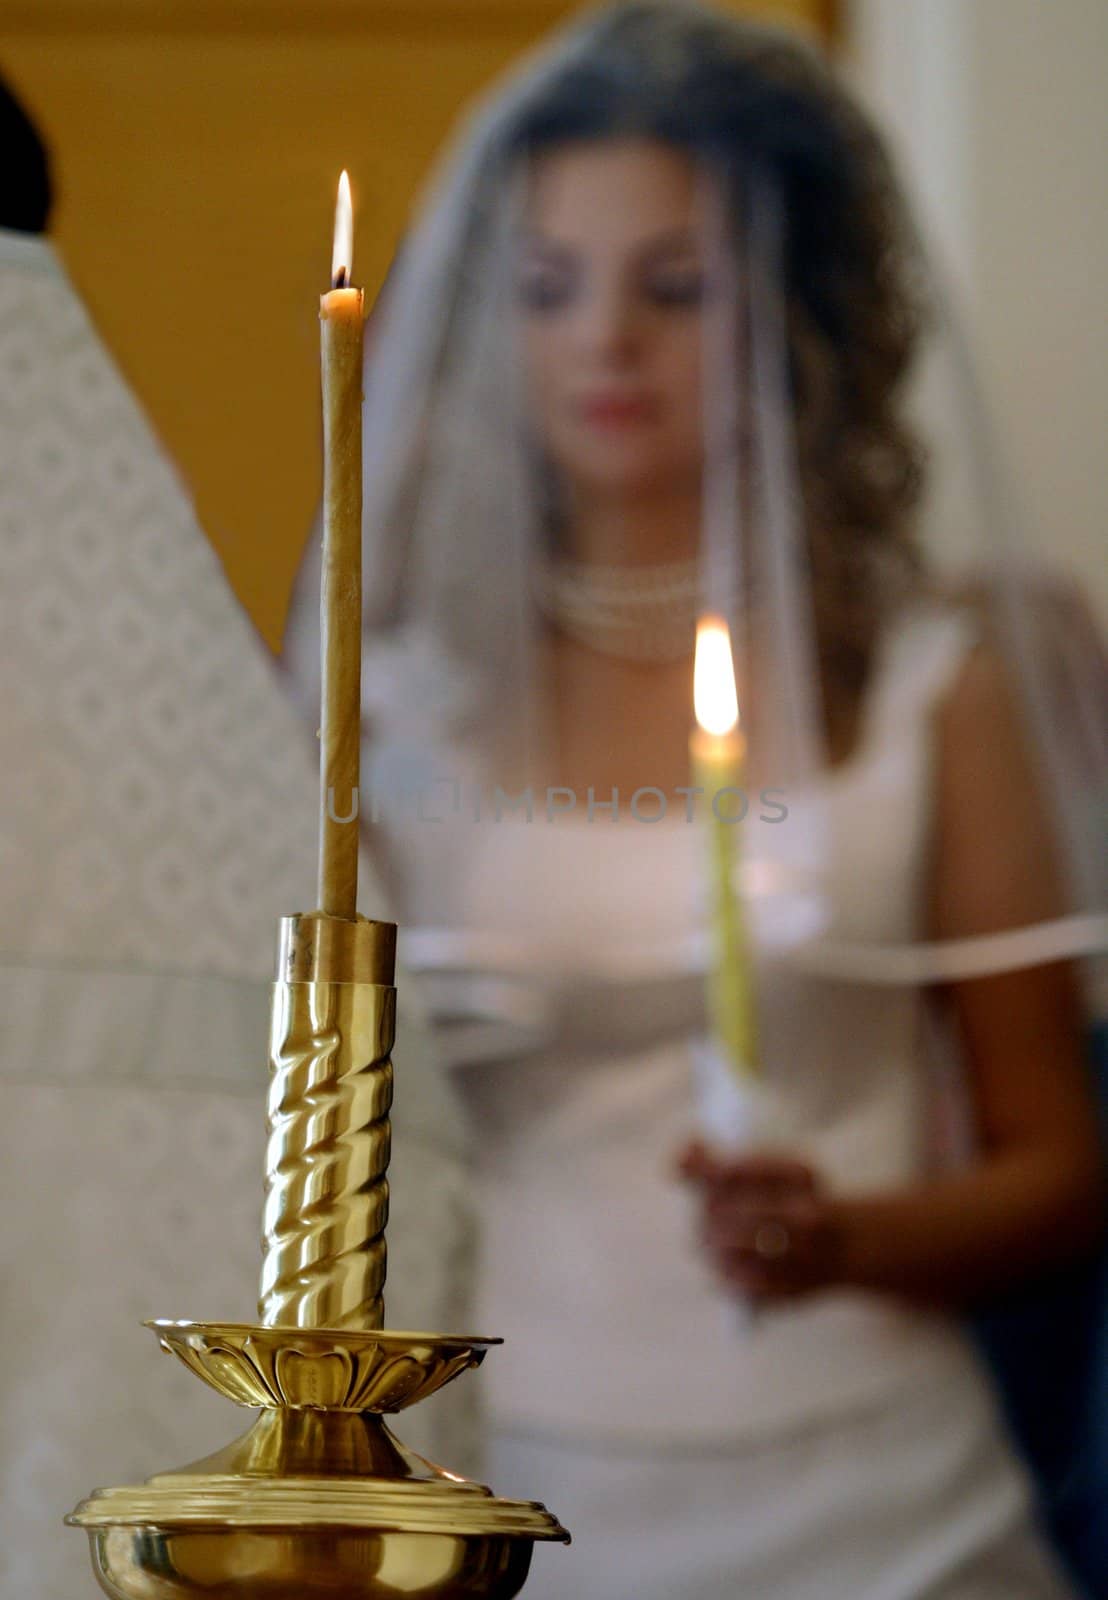 Bride wearing veil and holding lighted candle, golden candlestick in foreground - focus on candle.